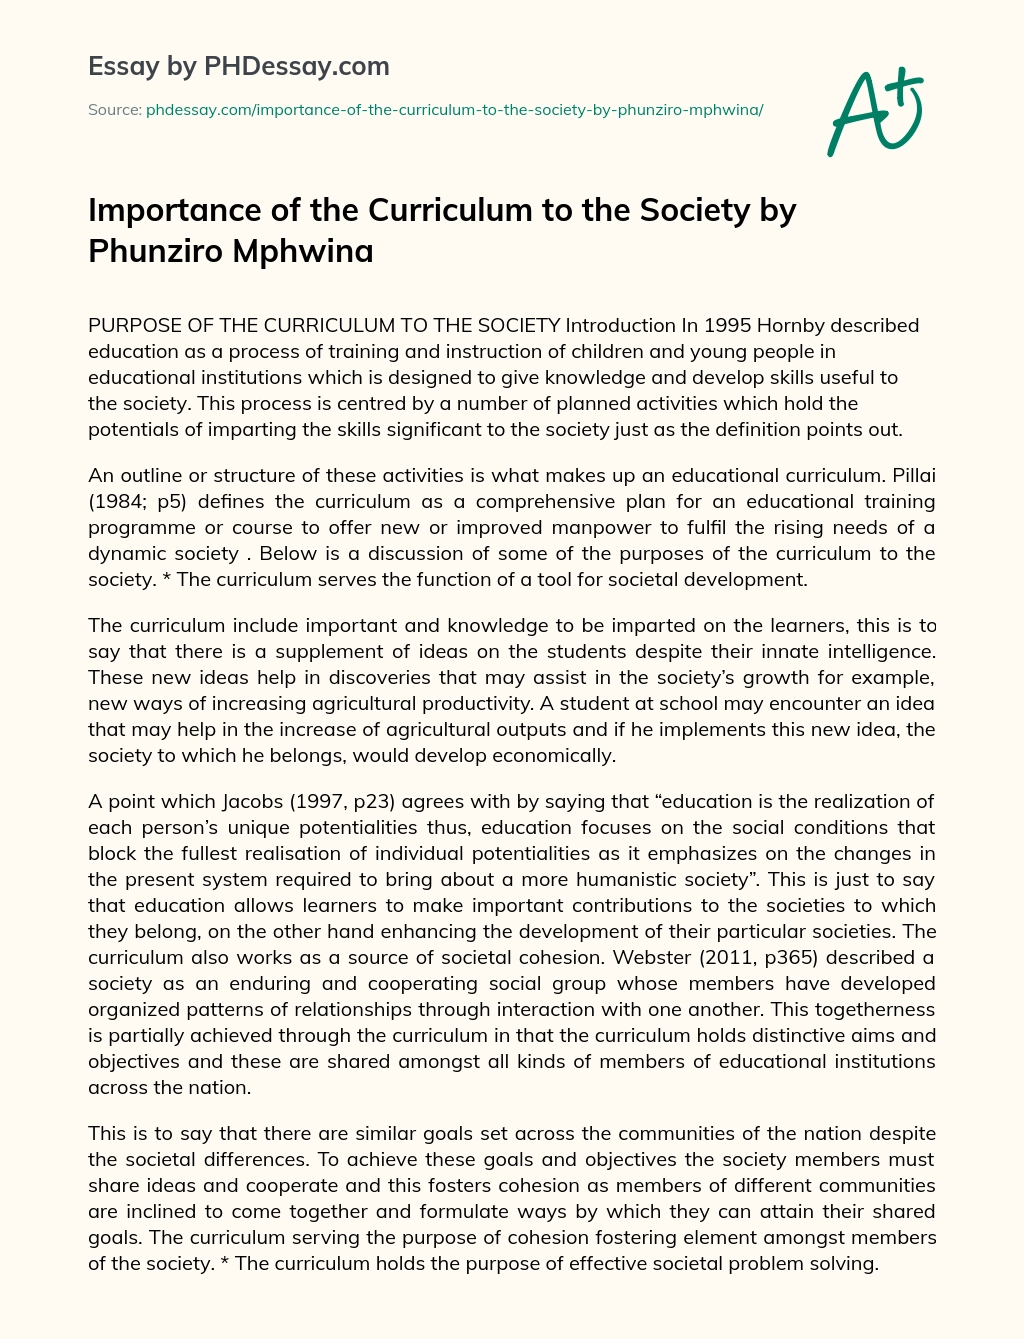 Importance of the Curriculum to the Society by Phunziro Mphwina essay